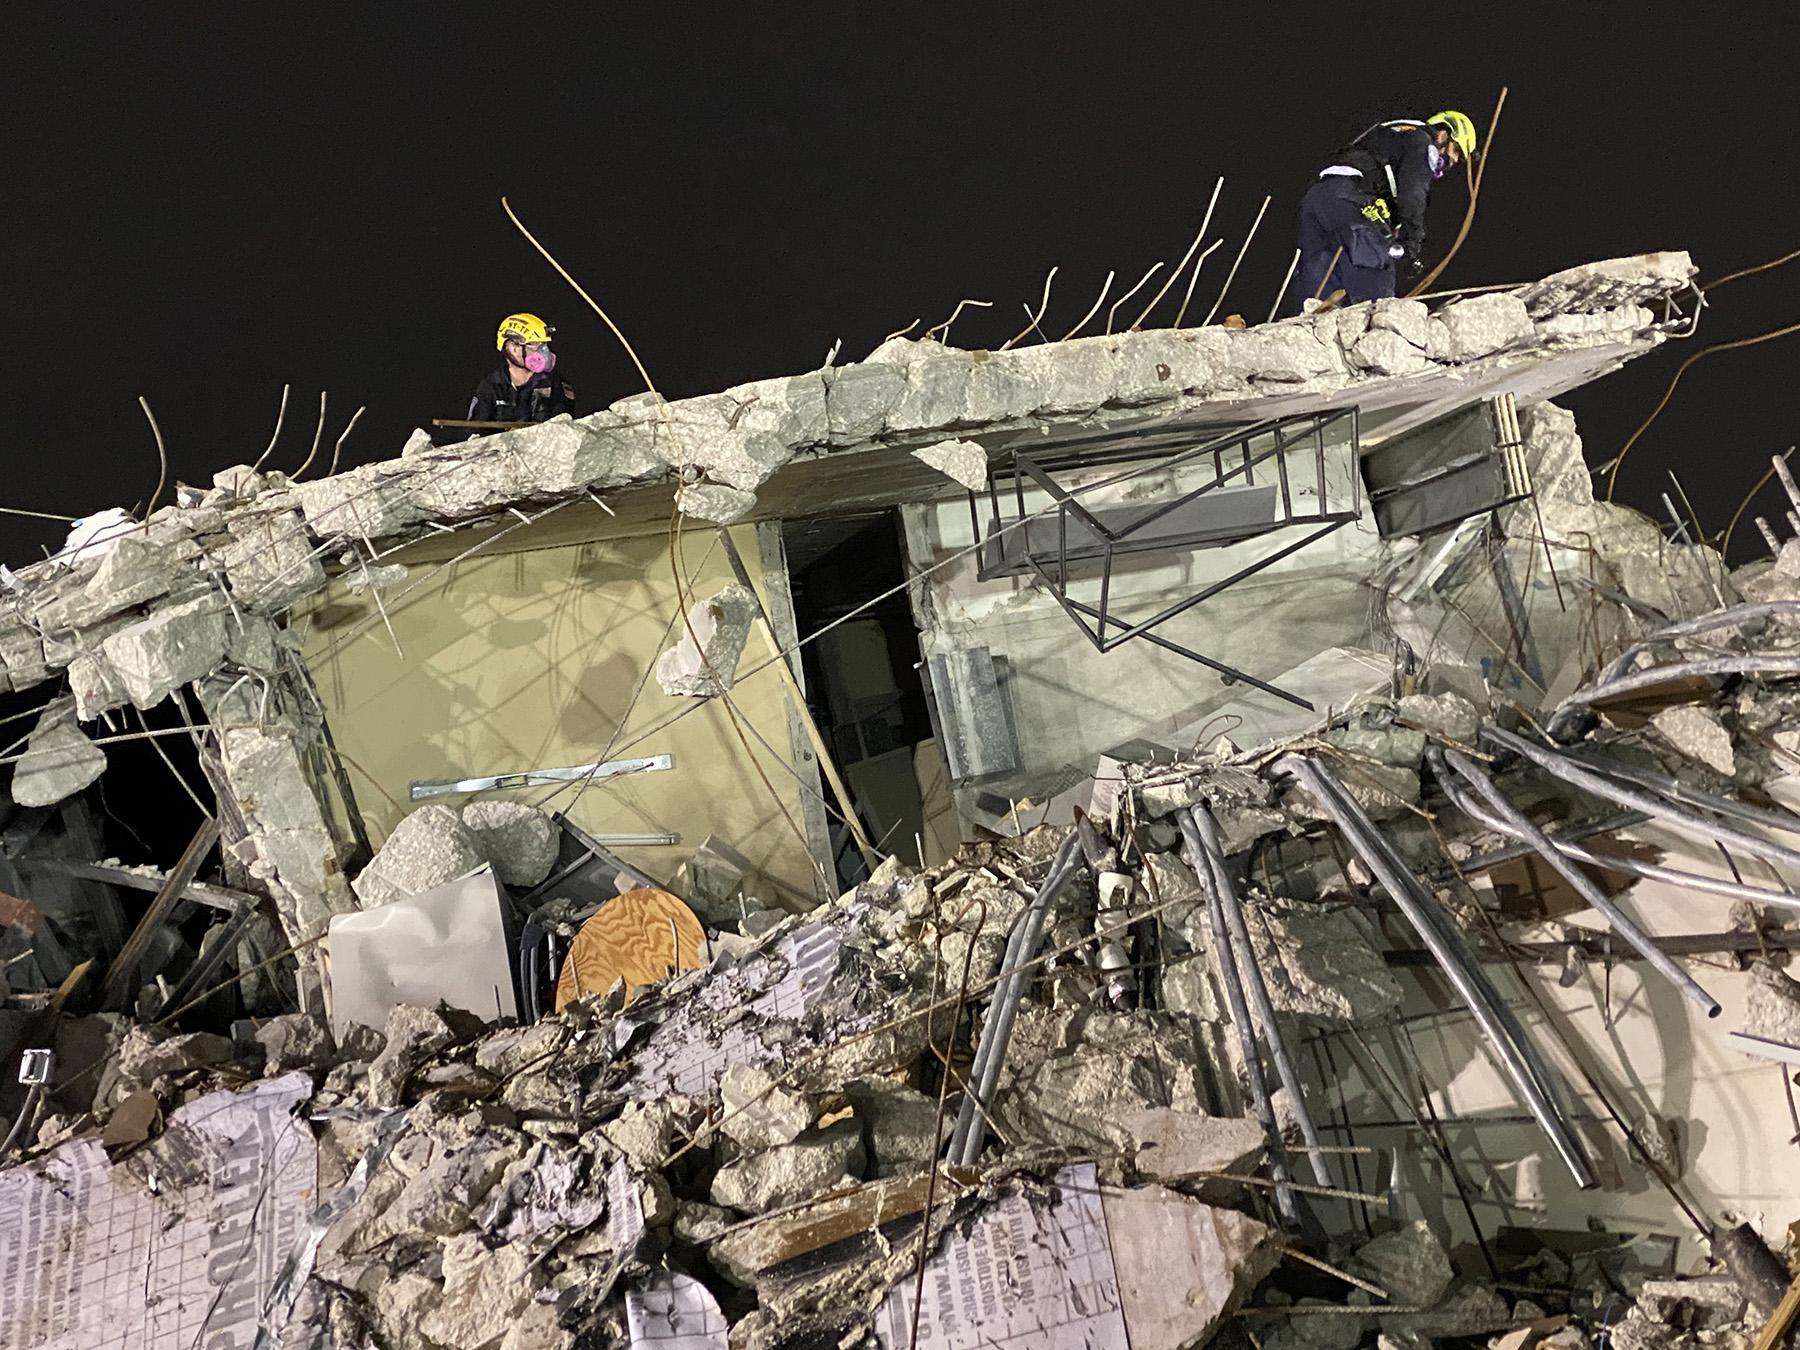 rescue workers work at a disaster site at night